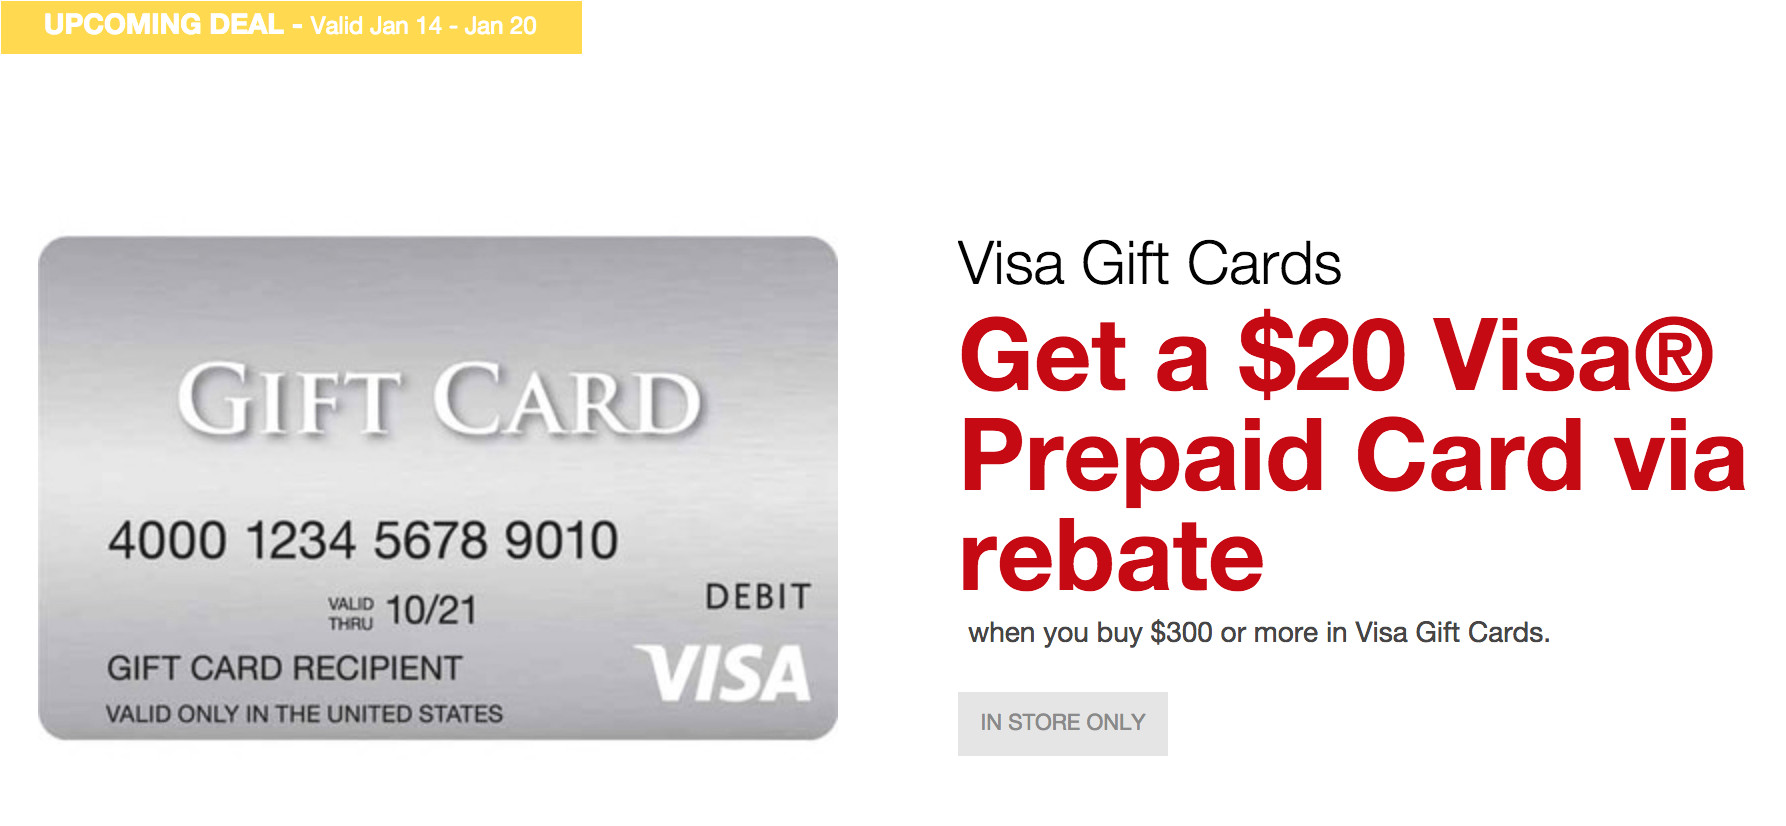 staples is offering a 20 prepaid visa rebate when buying 300 in visa gift cards from a staples store from 1 14 1 20